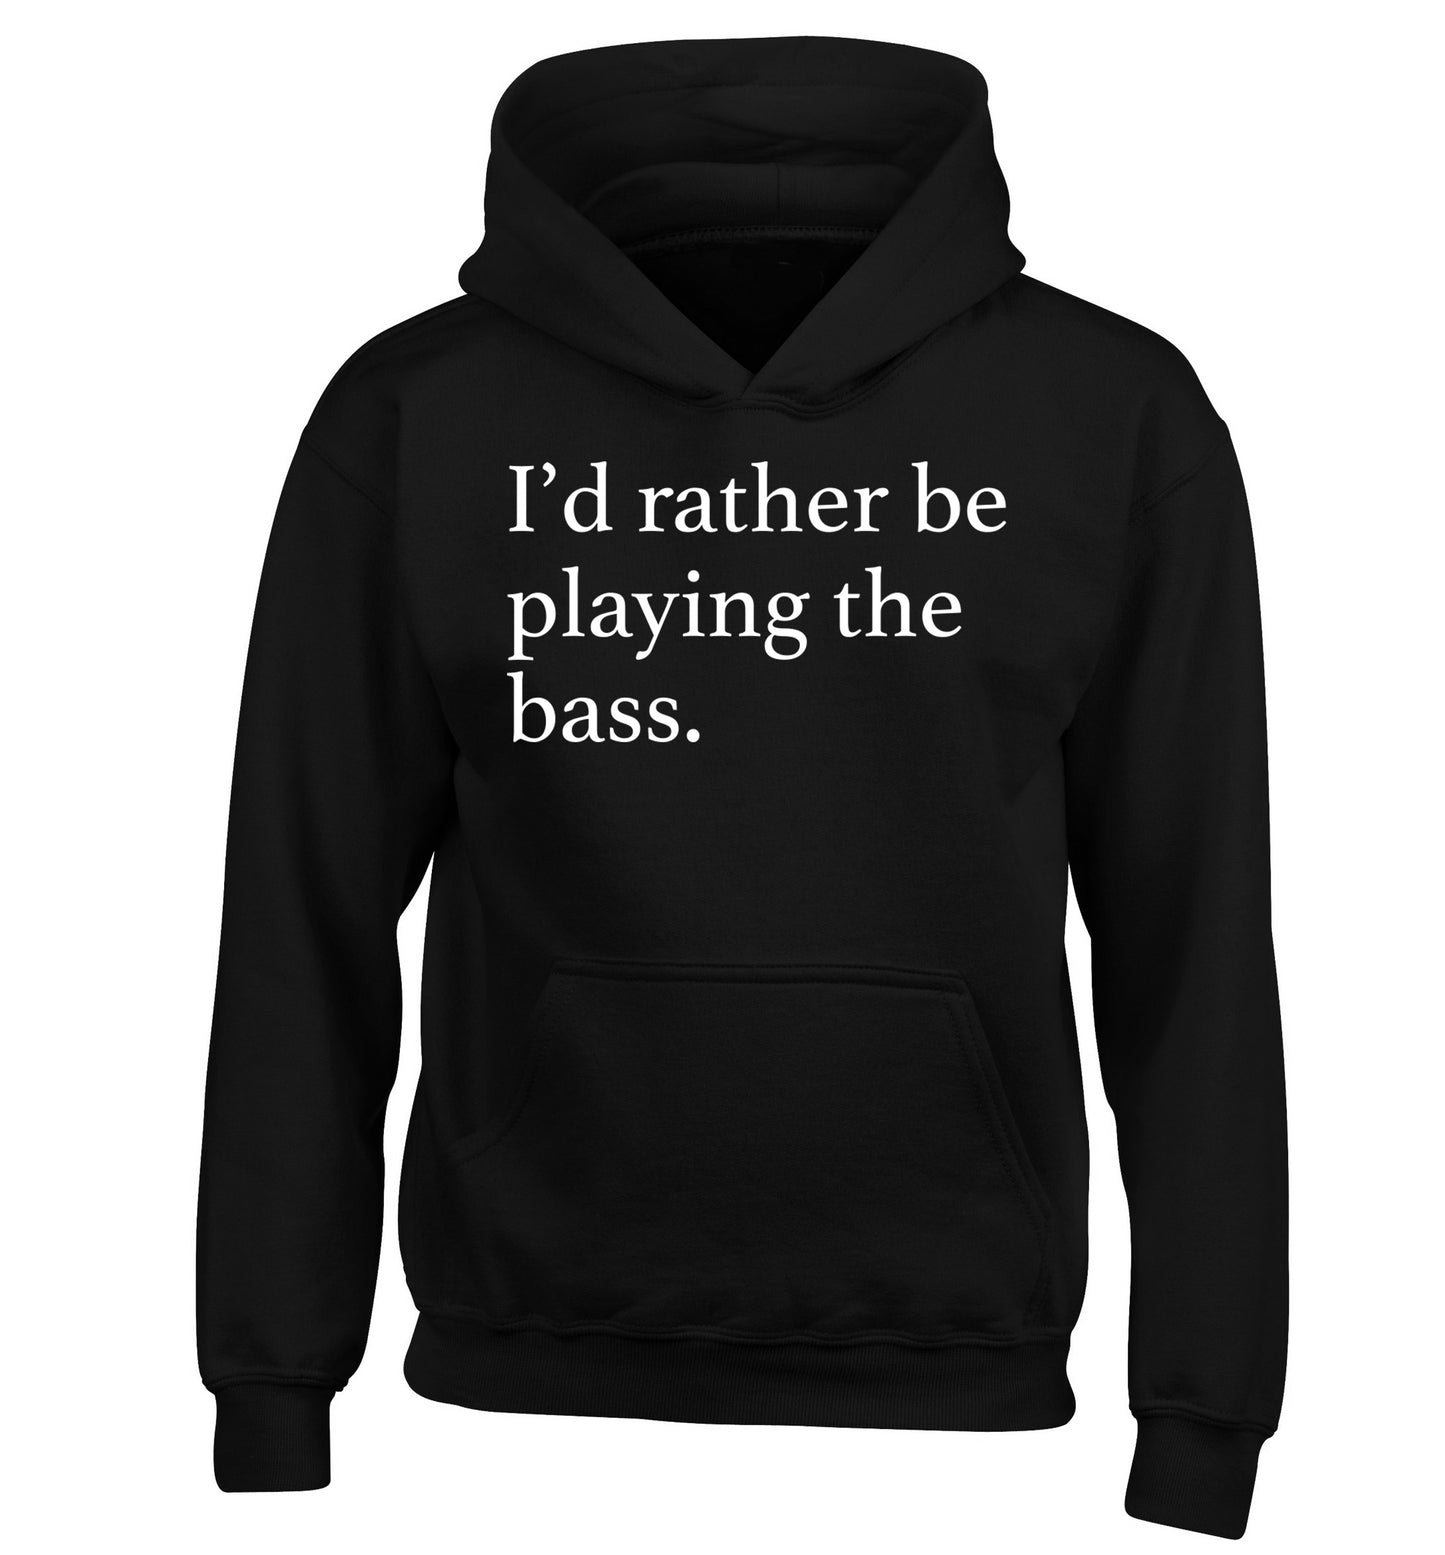 I'd rather by playing the bass children's black hoodie 12-14 Years